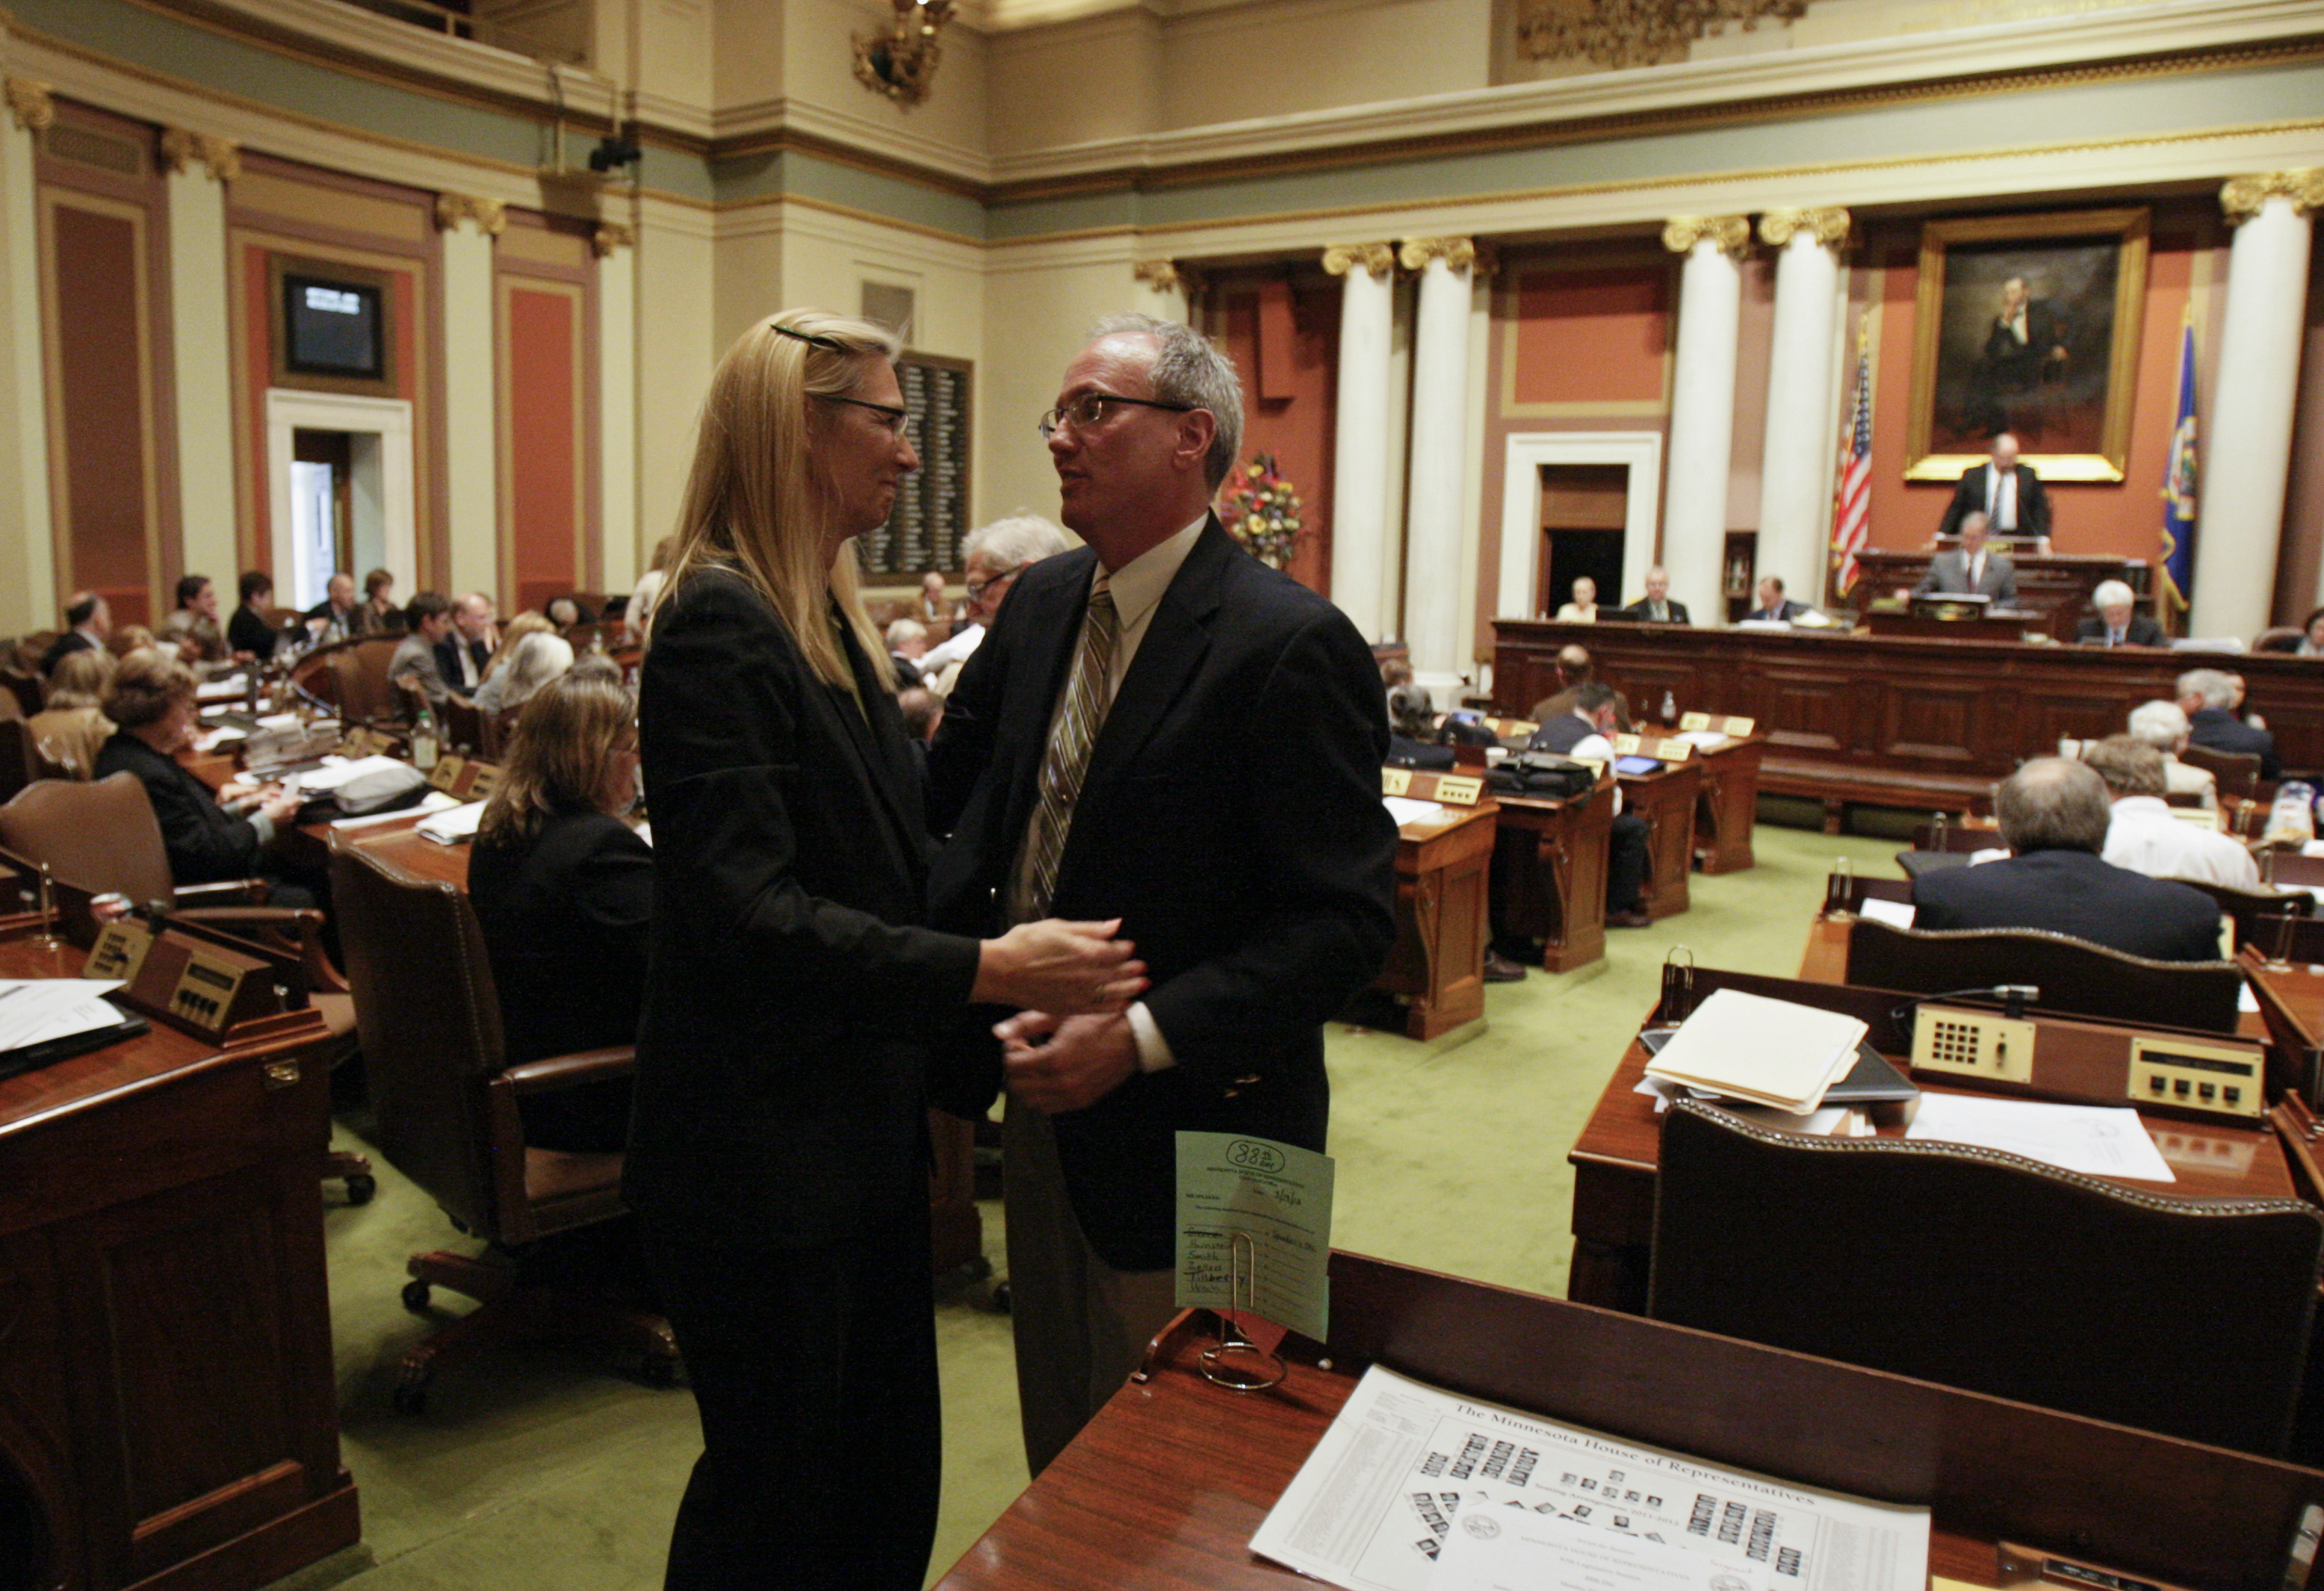 Rep. Denise Dittrich congratulates Rep. Tim O�Driscoll after his bill that would transfer management of the Permanent School Fund lands to five members appointed by the governor was passed by the House March 19. (Photo by Paul Battaglia)